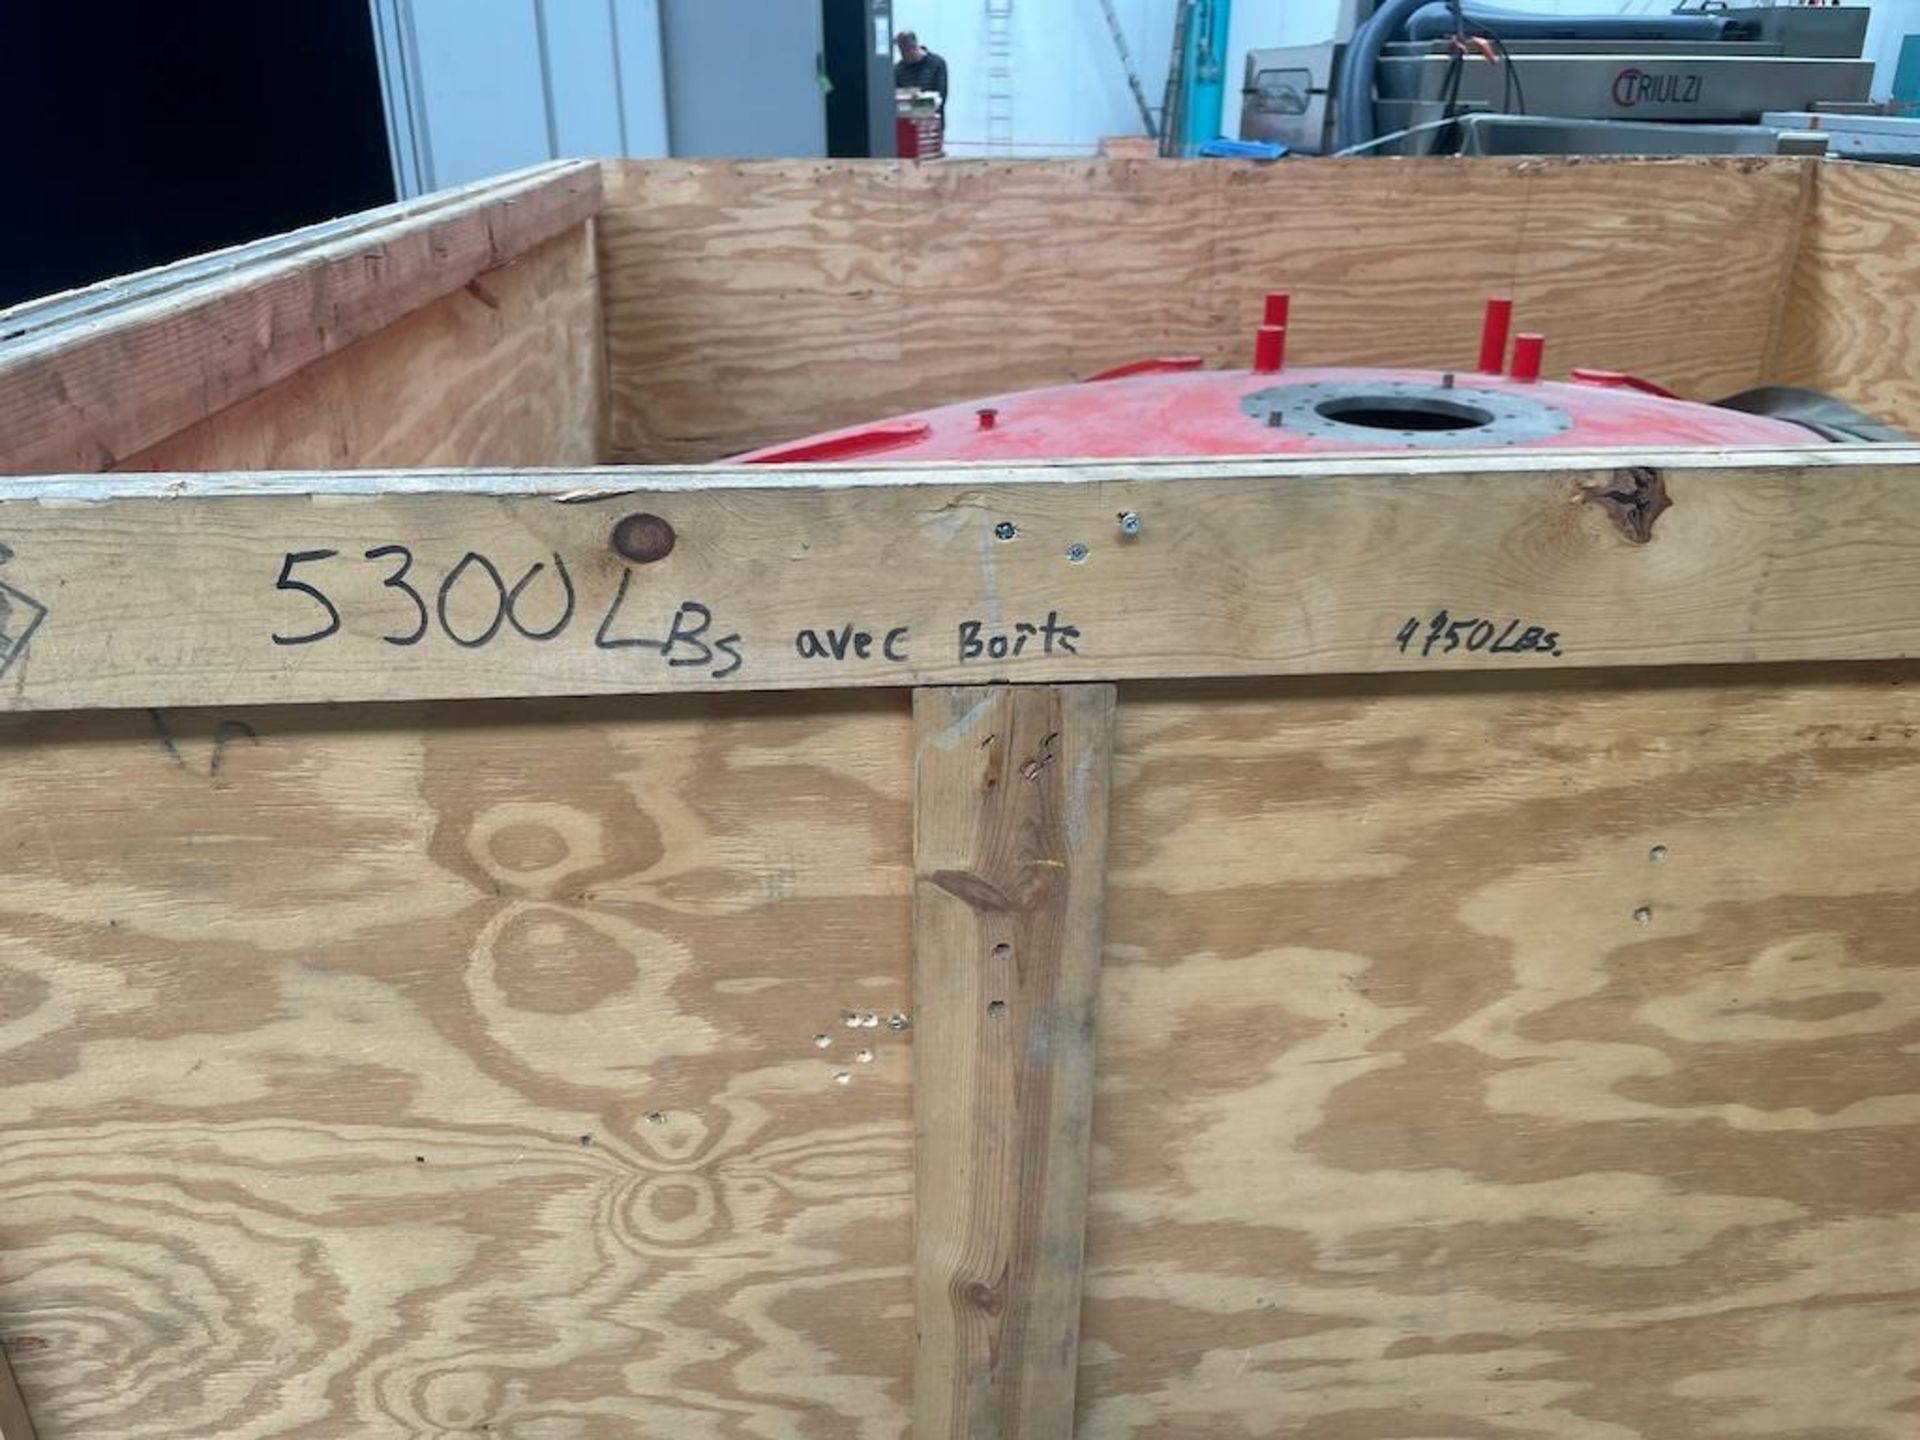 APPROX 7 FT DIAMETER X 3 FT HIGH HOLLOW STEEL FRAME, IN CRATE, SAYS 5,300 LBS [MATANE] *PLEASE NOTE, - Image 5 of 5